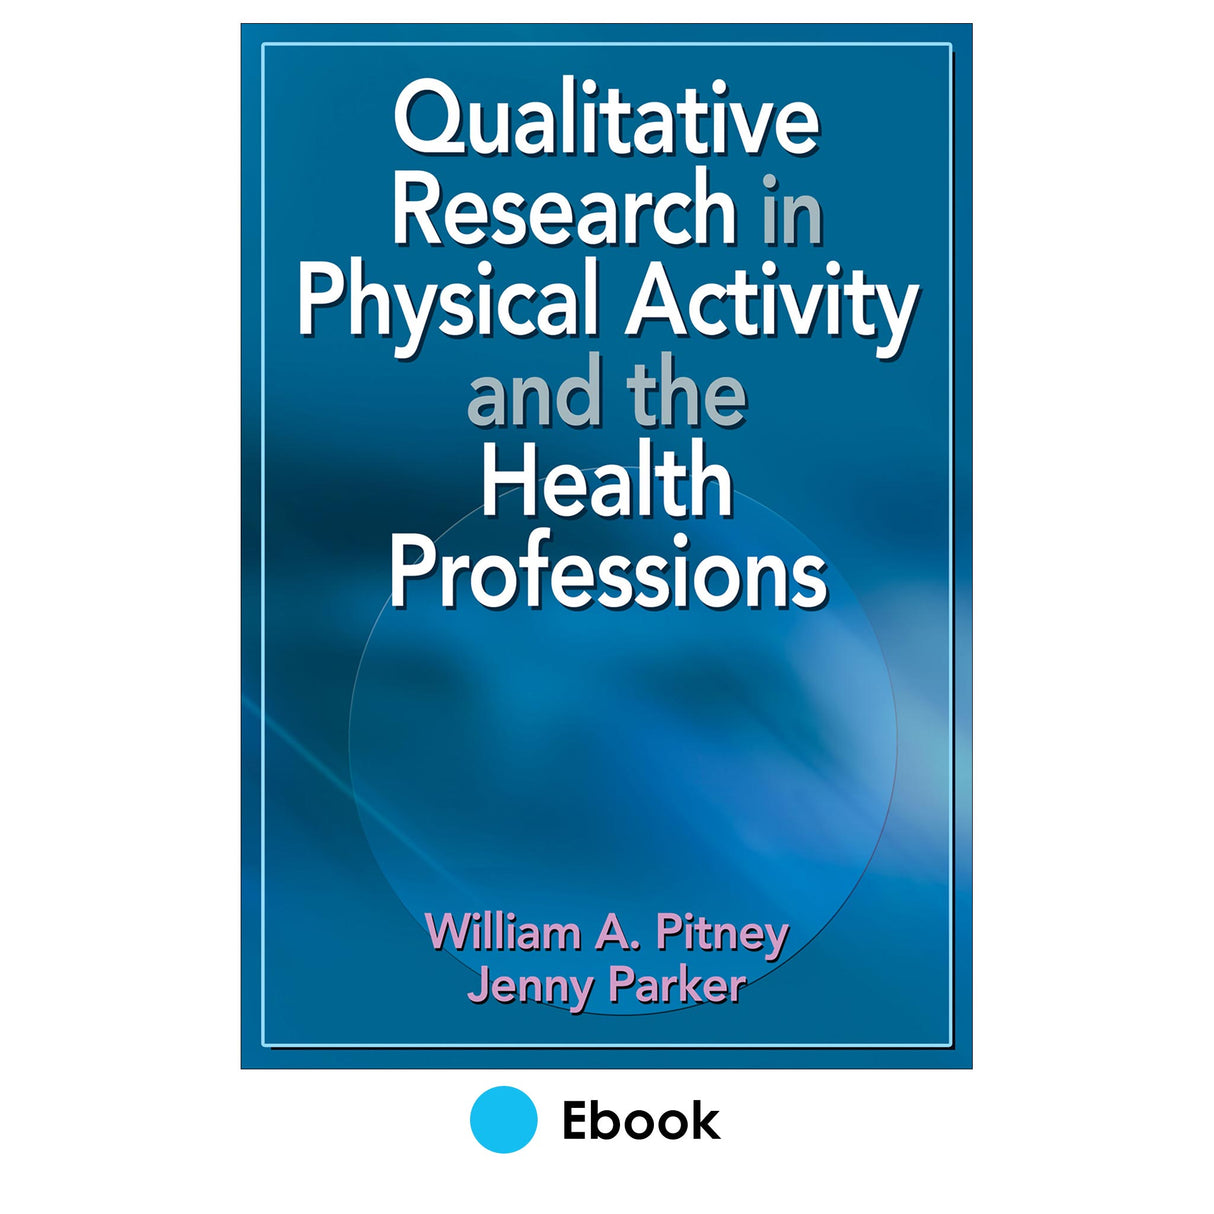 Qualitative Research in Physical Activity and the Health Professions PDF